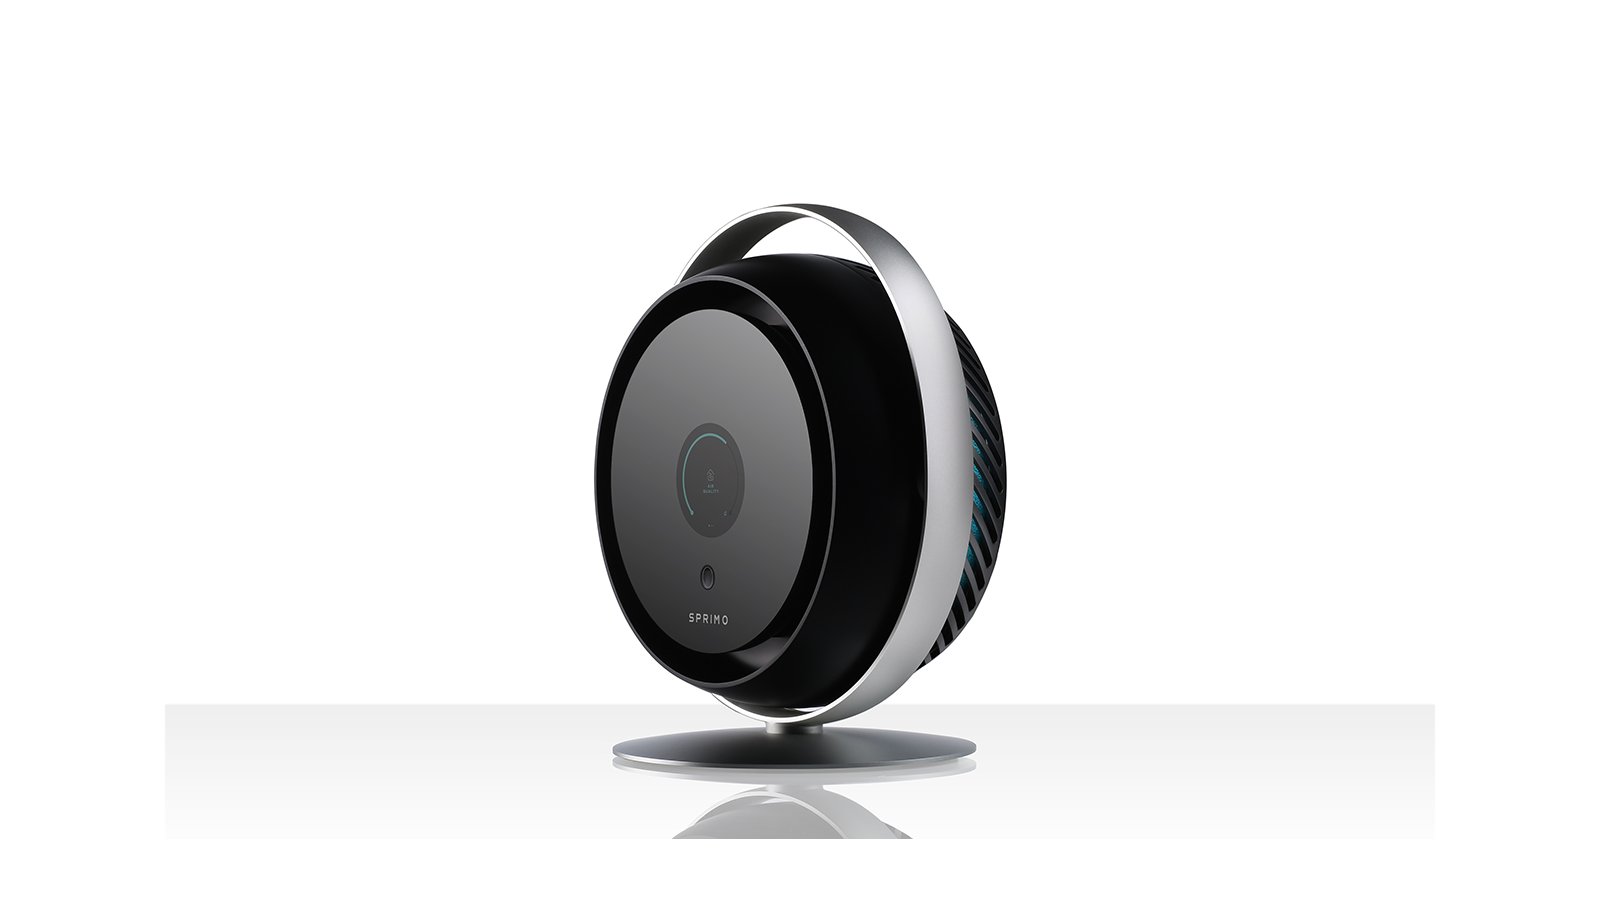 Sprimo Personal Air Purifier